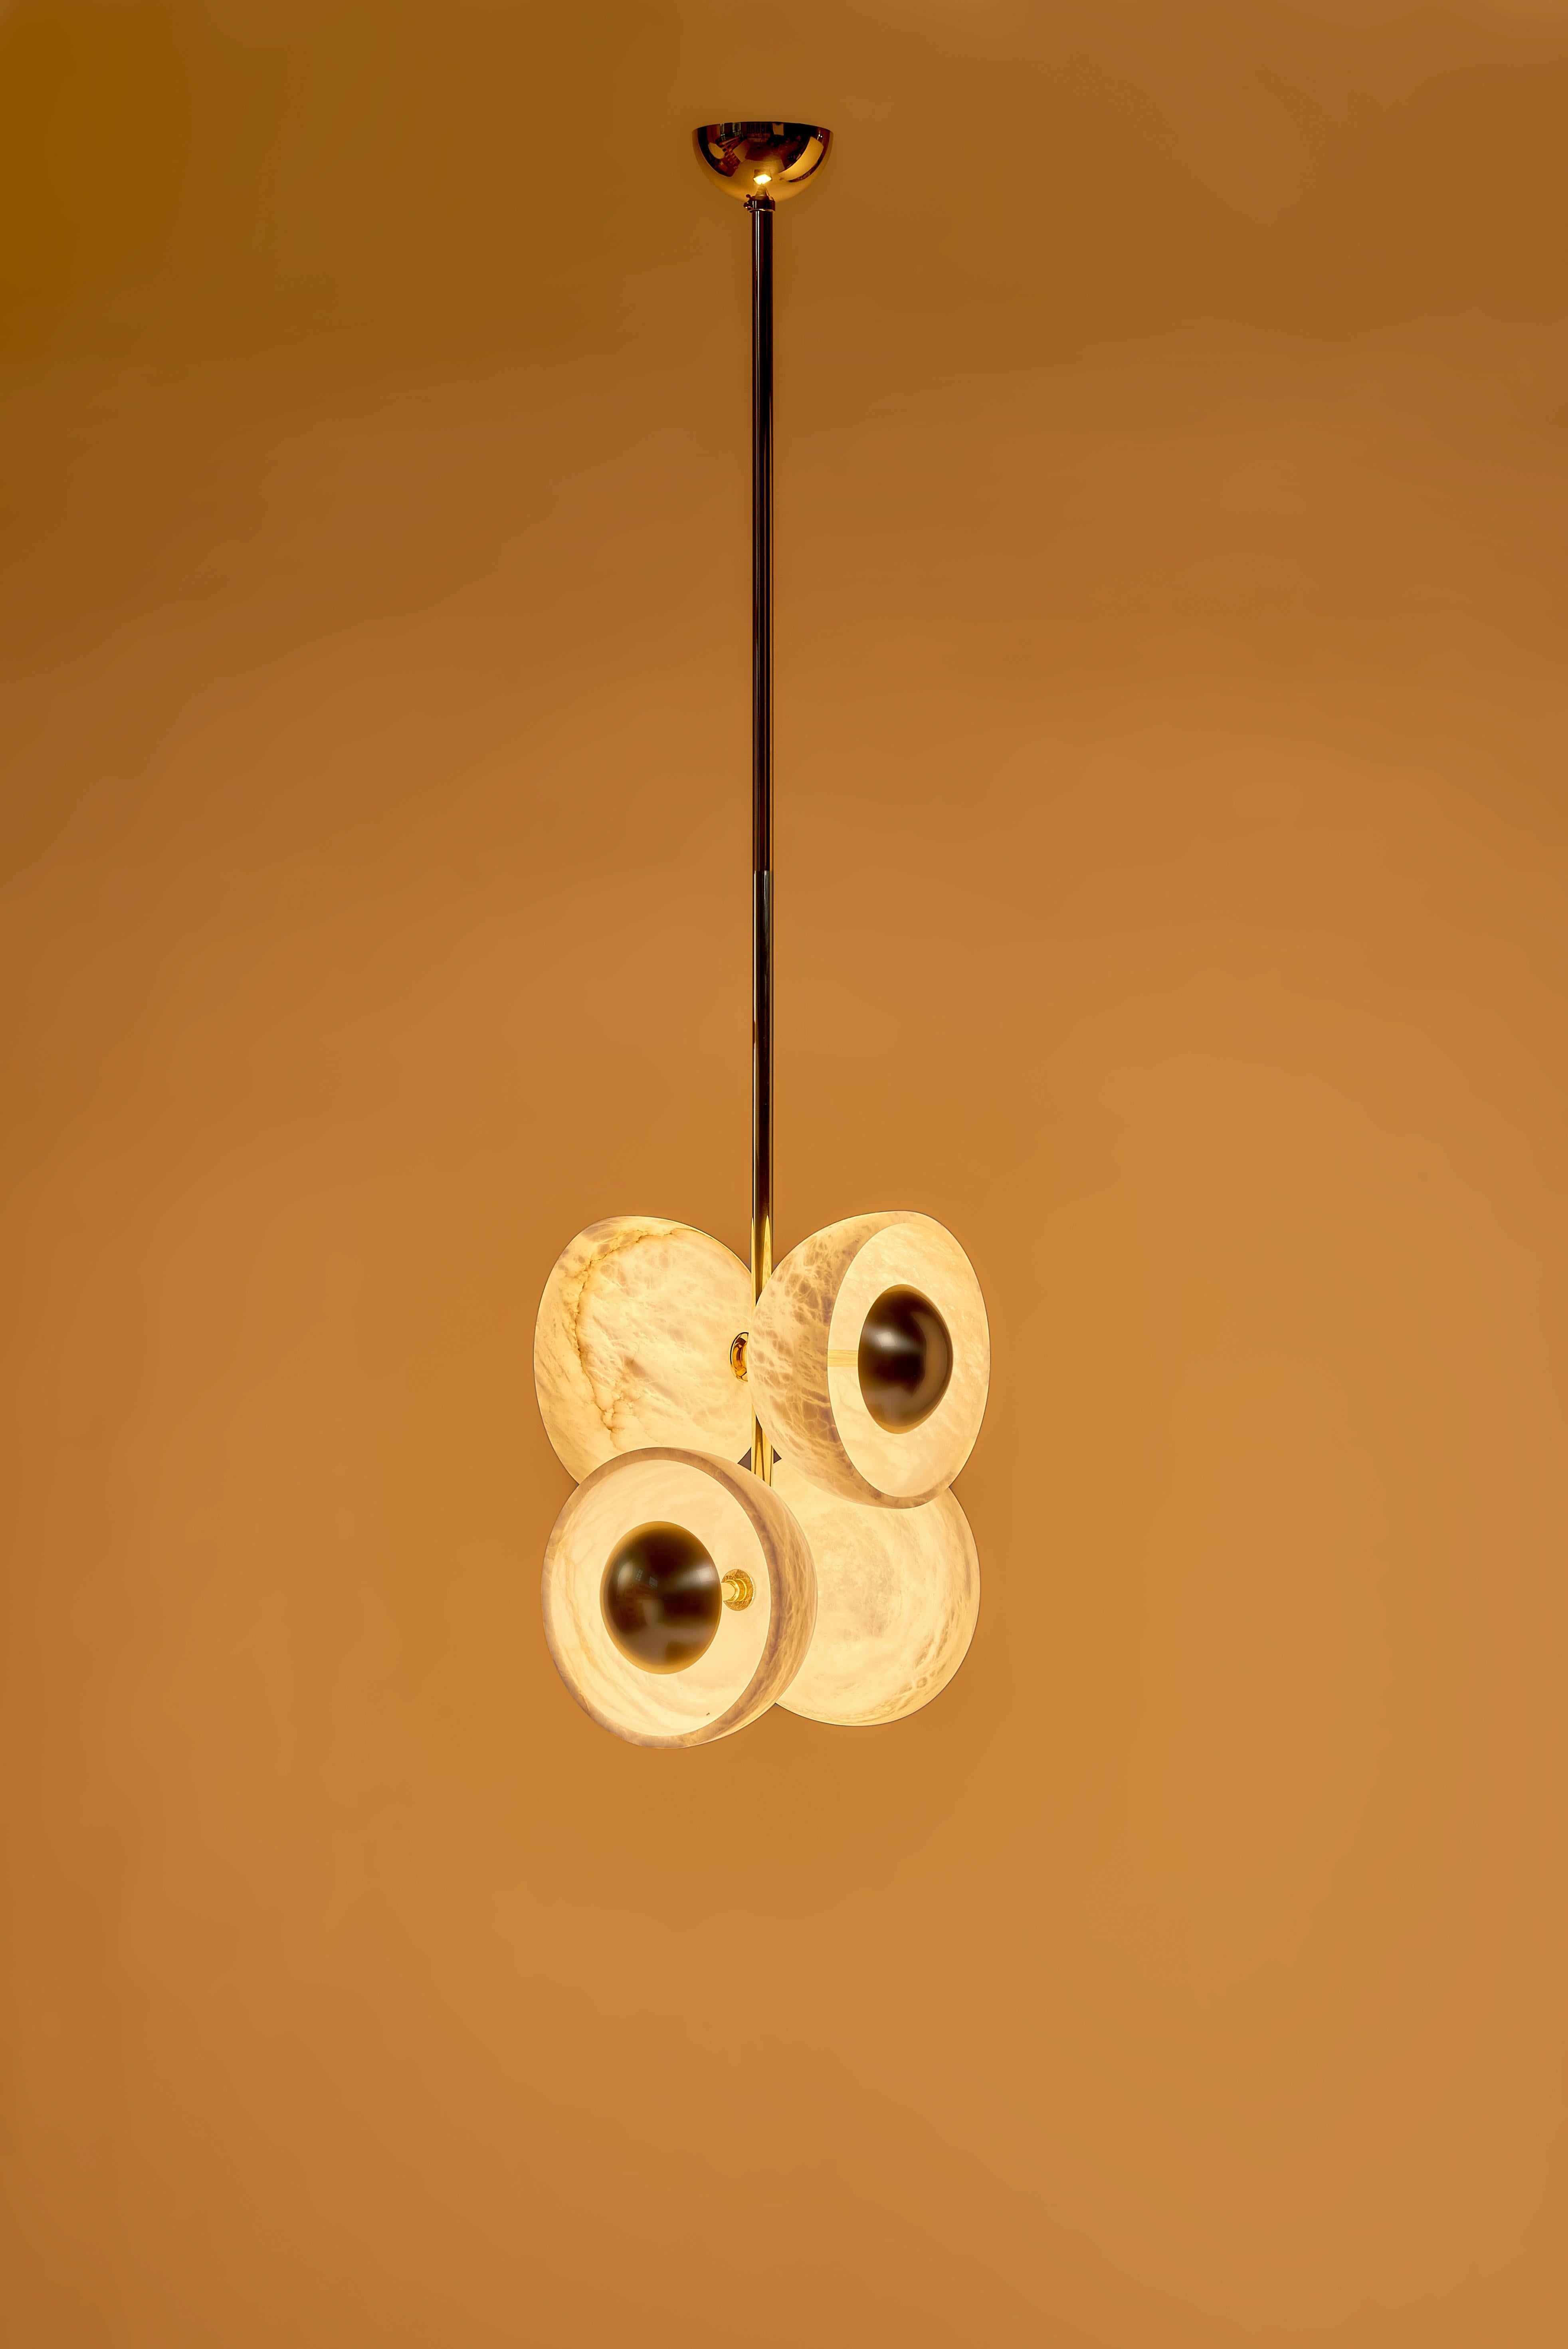 The Butterfly pendant is a captivating lighting fixture that combines elegance, compactness, and a touch of whimsy. Its design is inspired by the graceful wings of butterflies, which is reflected in the use of alabaster cups and polished brass